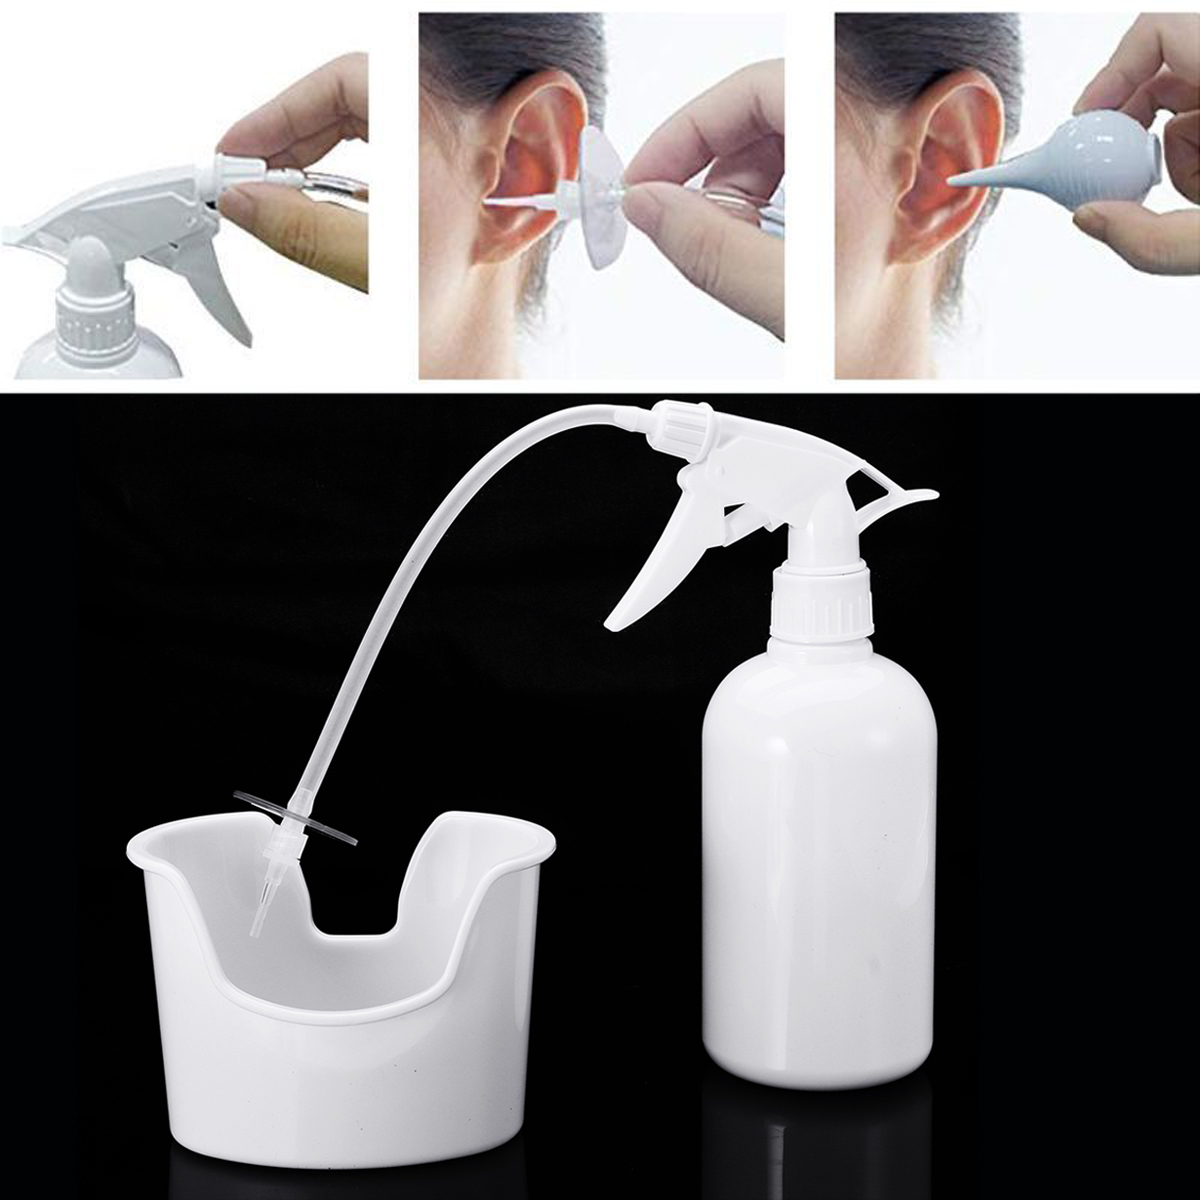 Ear-Wax-Removal-Kit-Ear-Irrigation-Ear-Washer-Bottles-System-For-Ear-Cleaning-Tools-Set--5-Tips-1406121-1